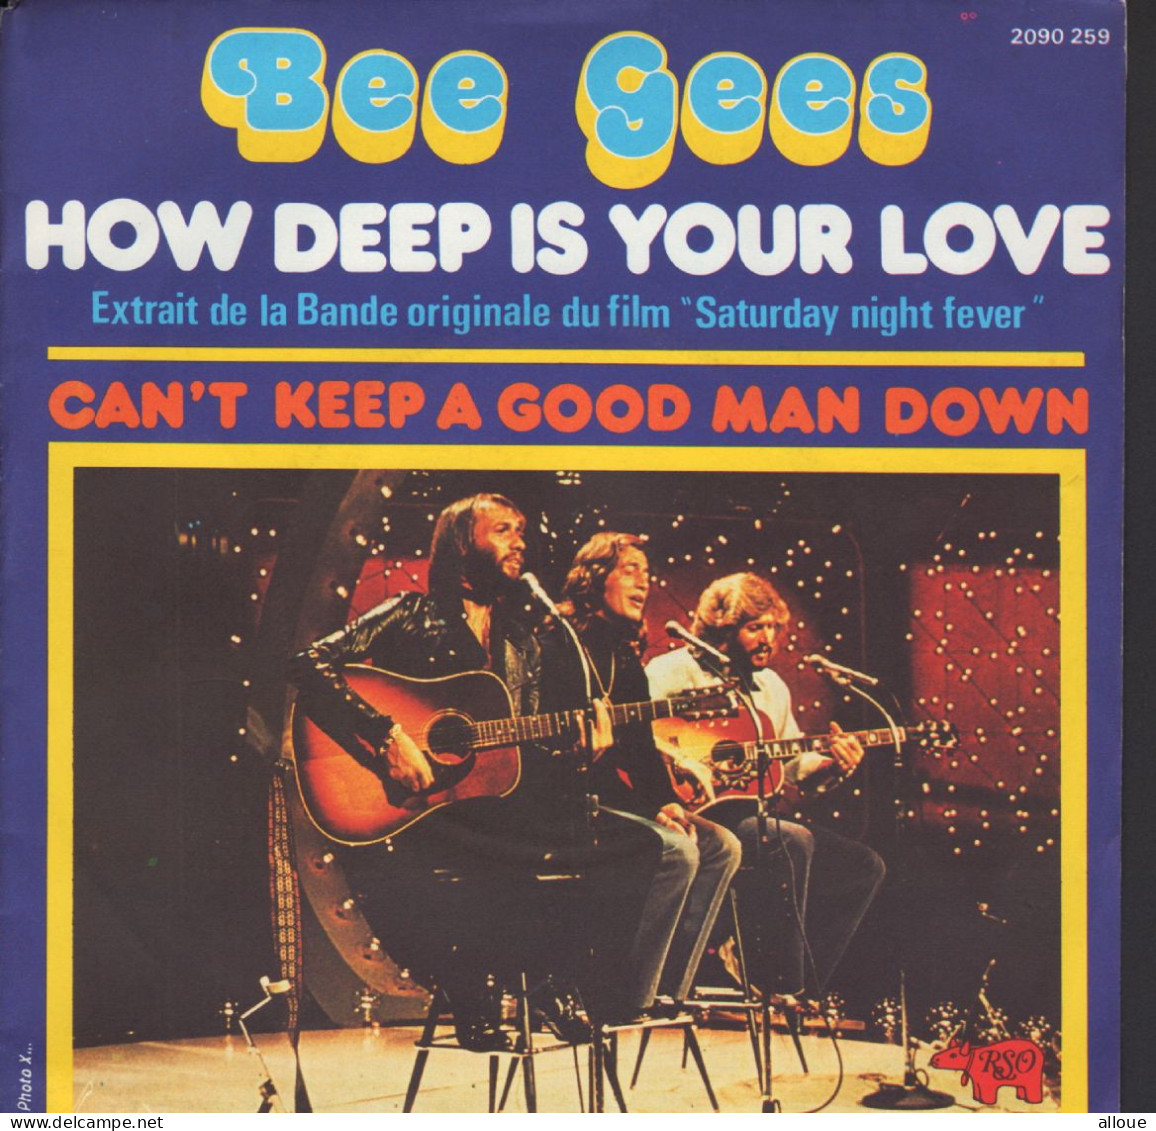 THE BEE GEES - FR SG - HOW DEEP IS YOUR LOVE + 1 - Disco, Pop